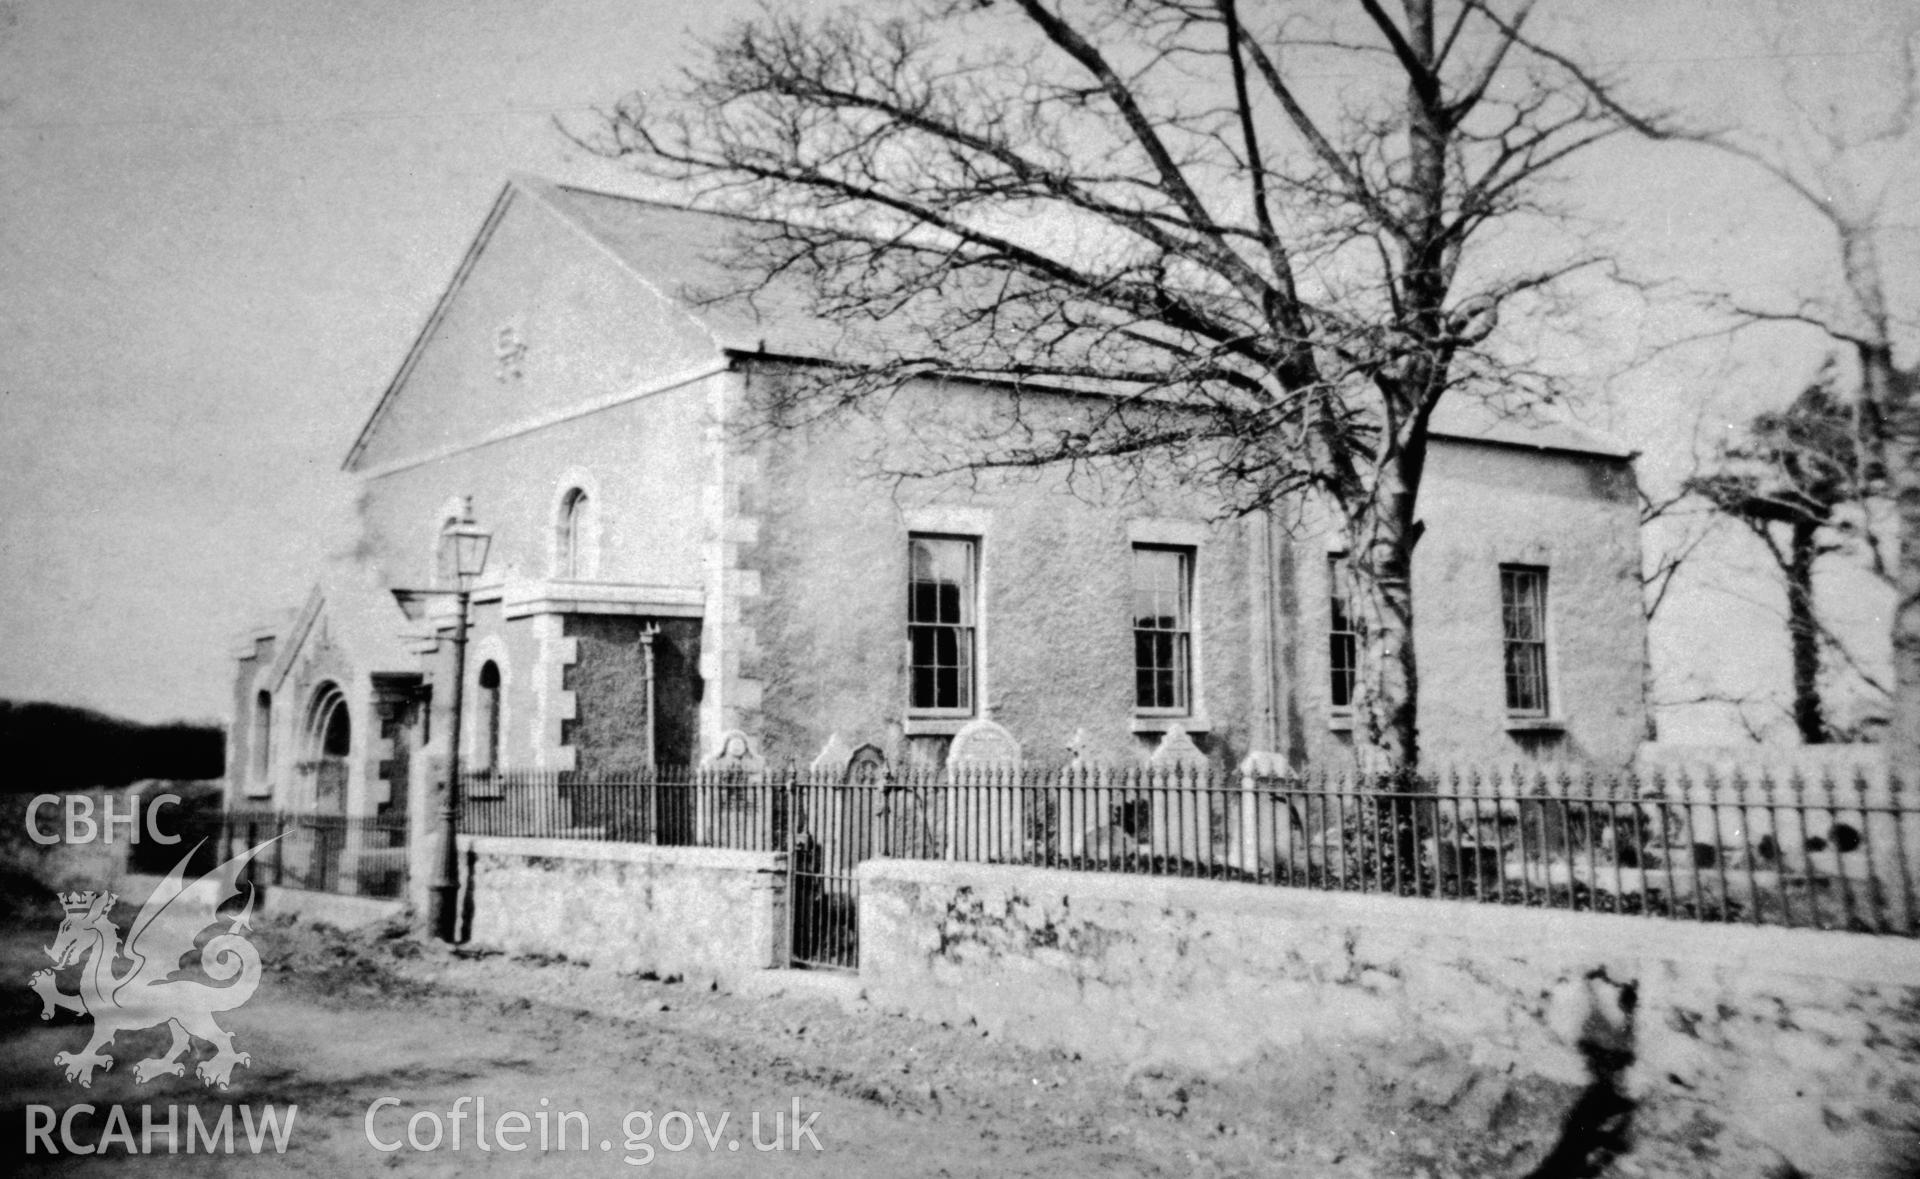 Copy print of an old black and white photograph of Ebenezer Chapel, Old Colwyn, undated.